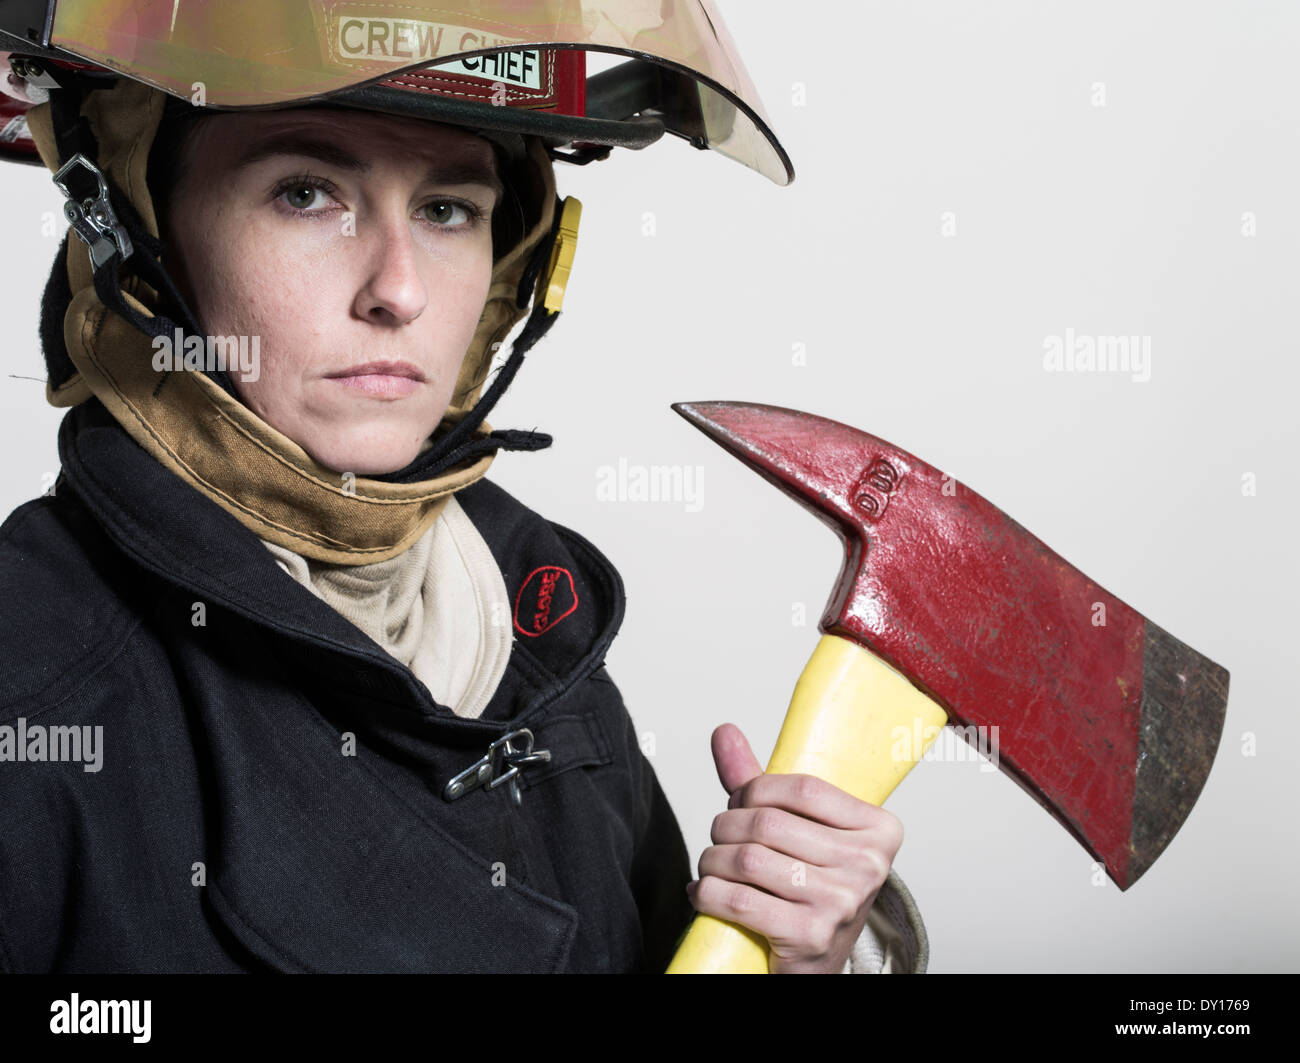 Female firefighter in structural firefighting uniform with breathing apparatus and axe Stock Photo